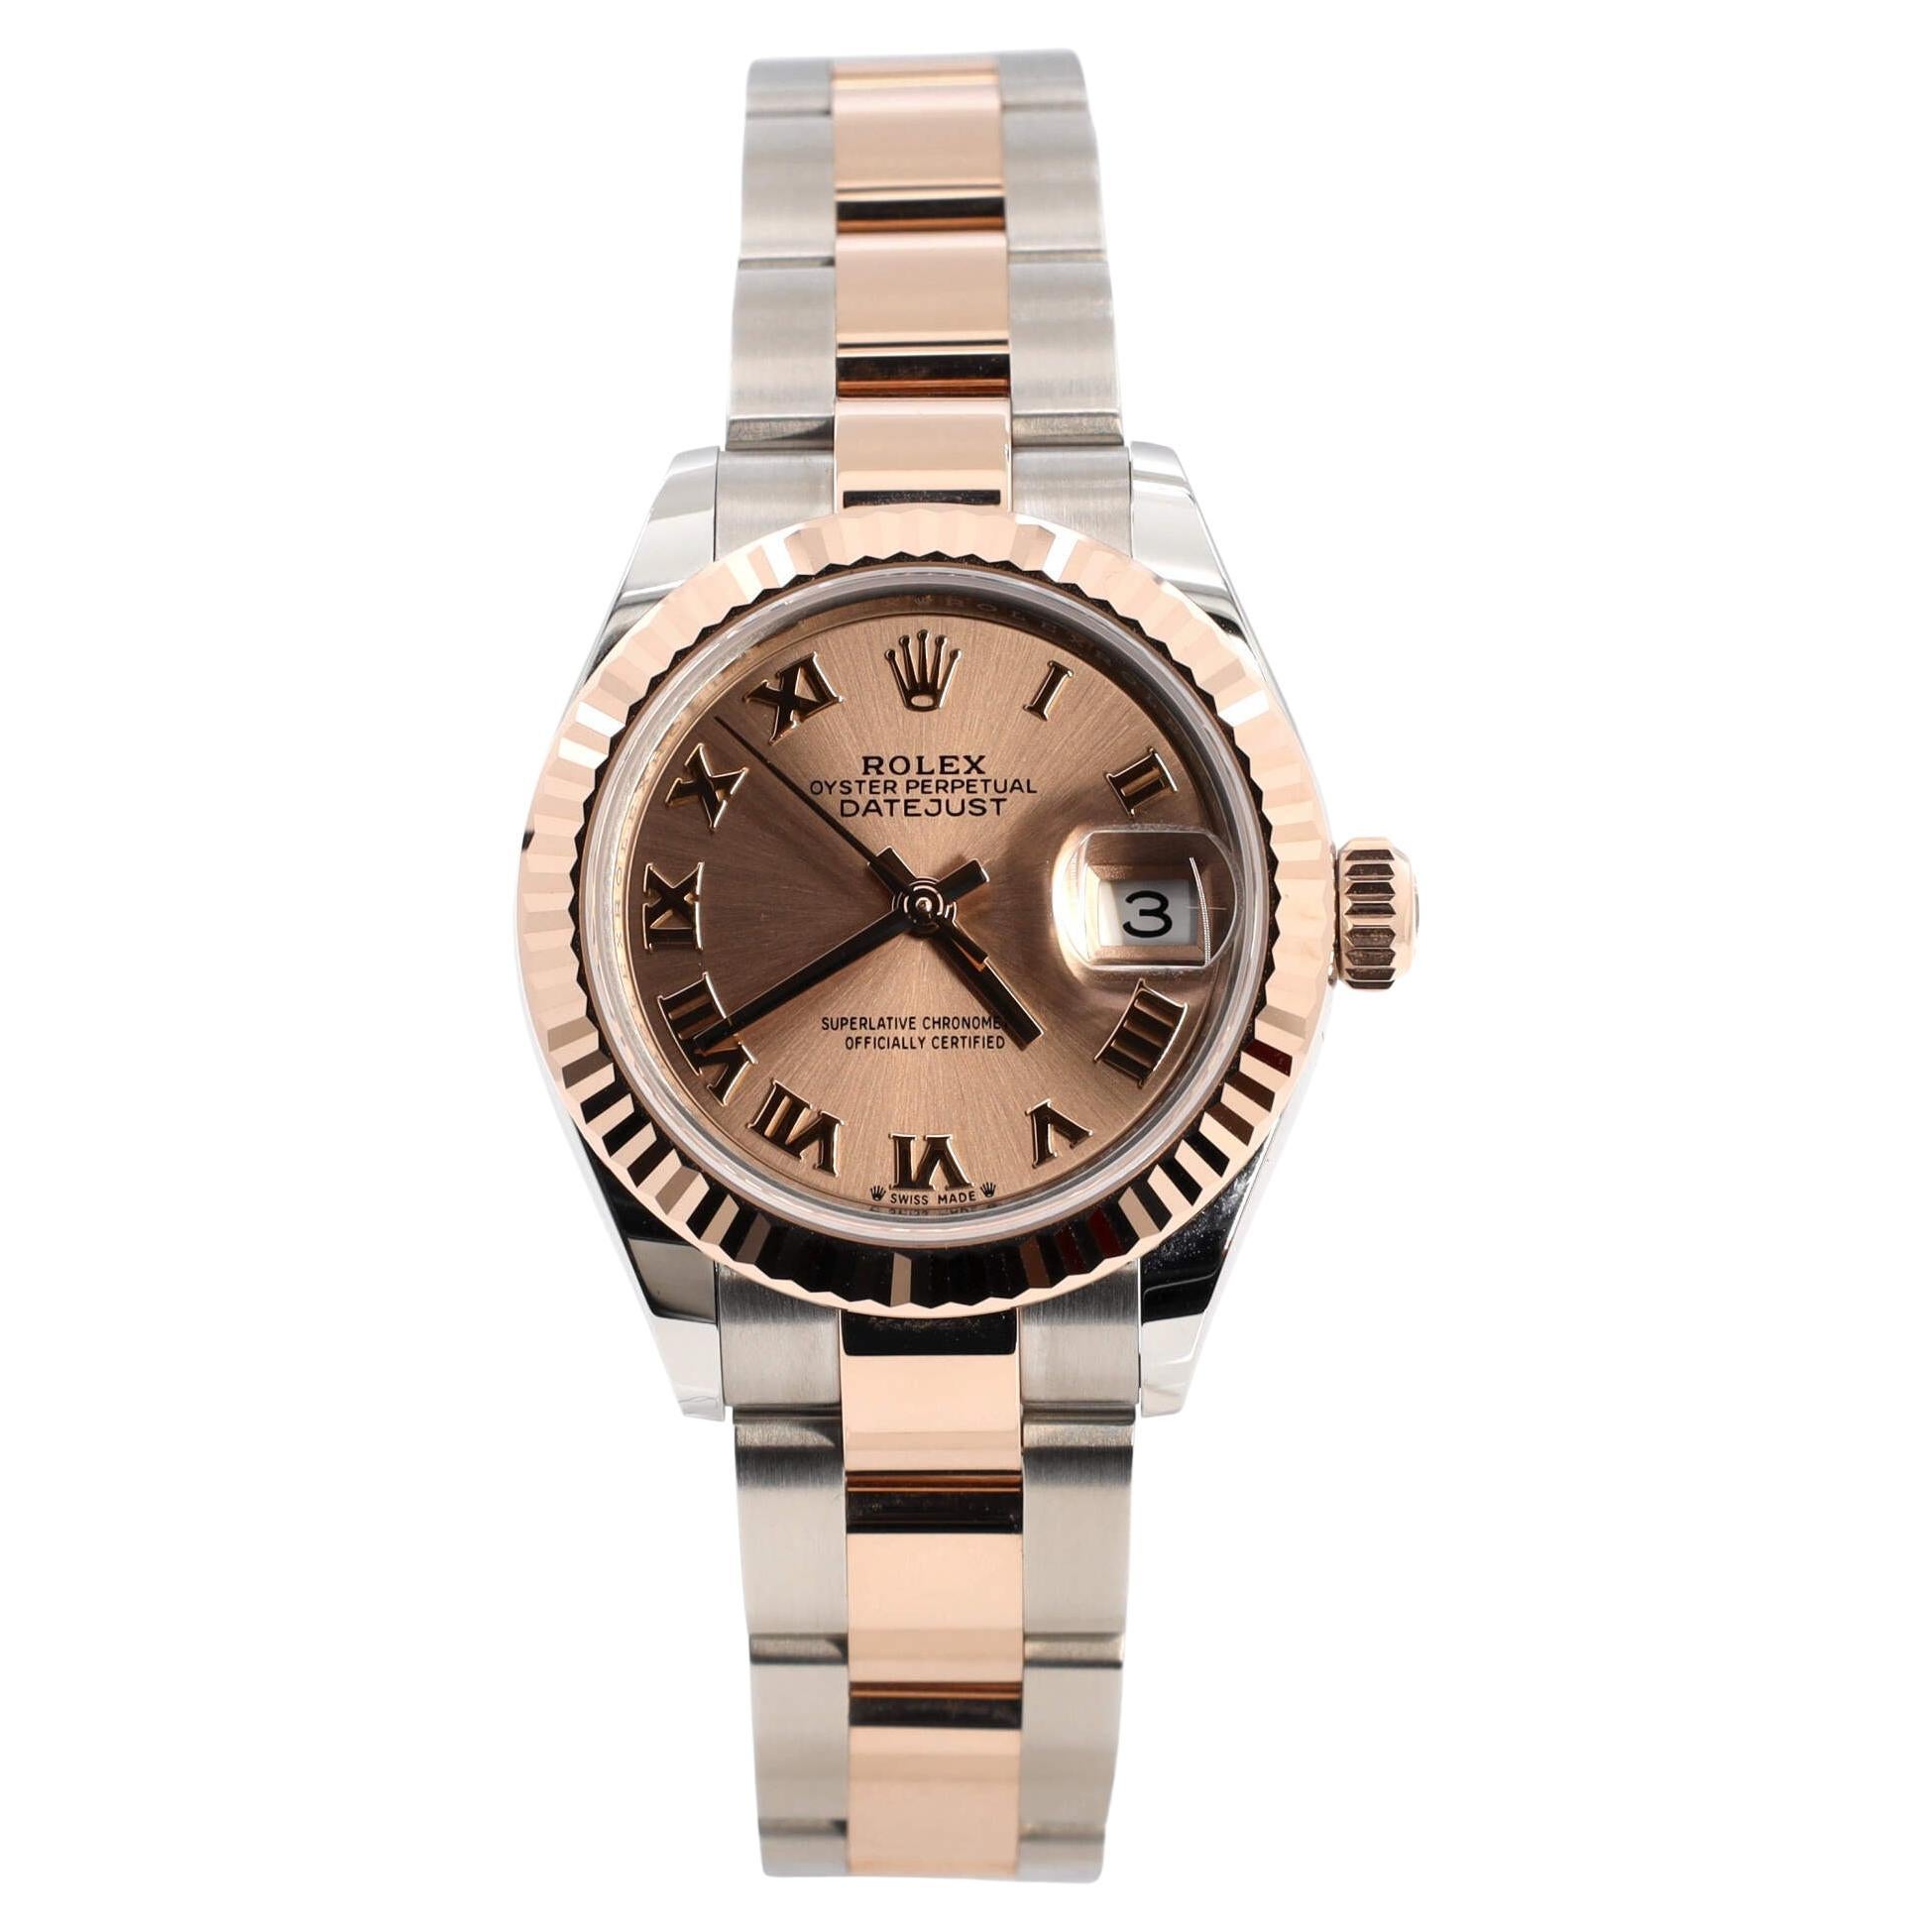  Rolex Oyster Perpetual Datejust Automatic Watch Stainless Steel and Rose Gold